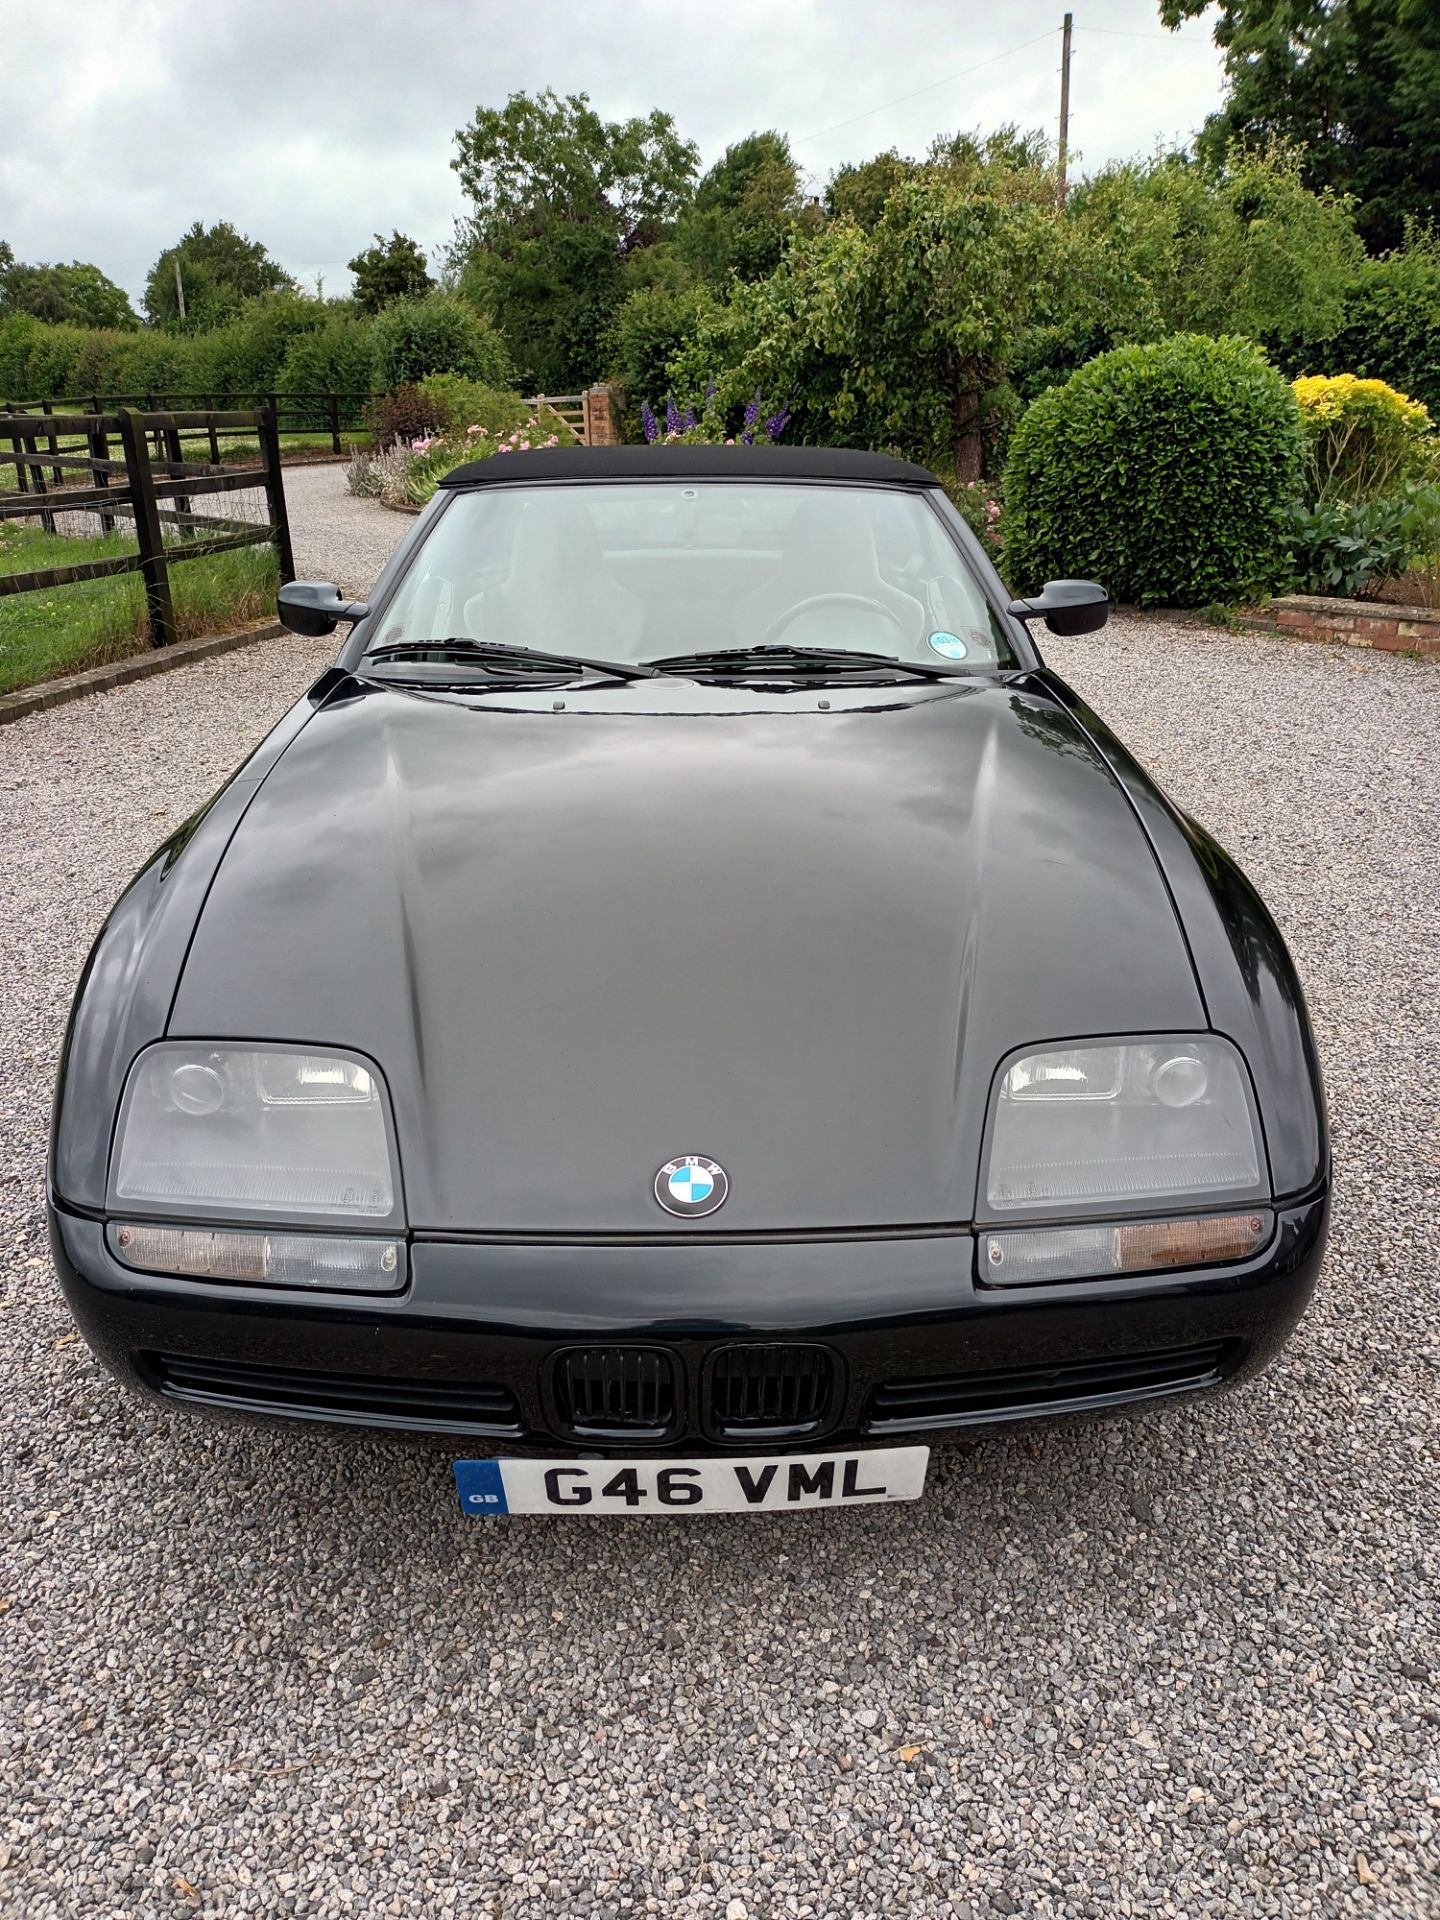 1989 BMW Z1 Registration number G46 VML Left hand drive (as were all Z1's produced) Dream Black with - Image 5 of 30